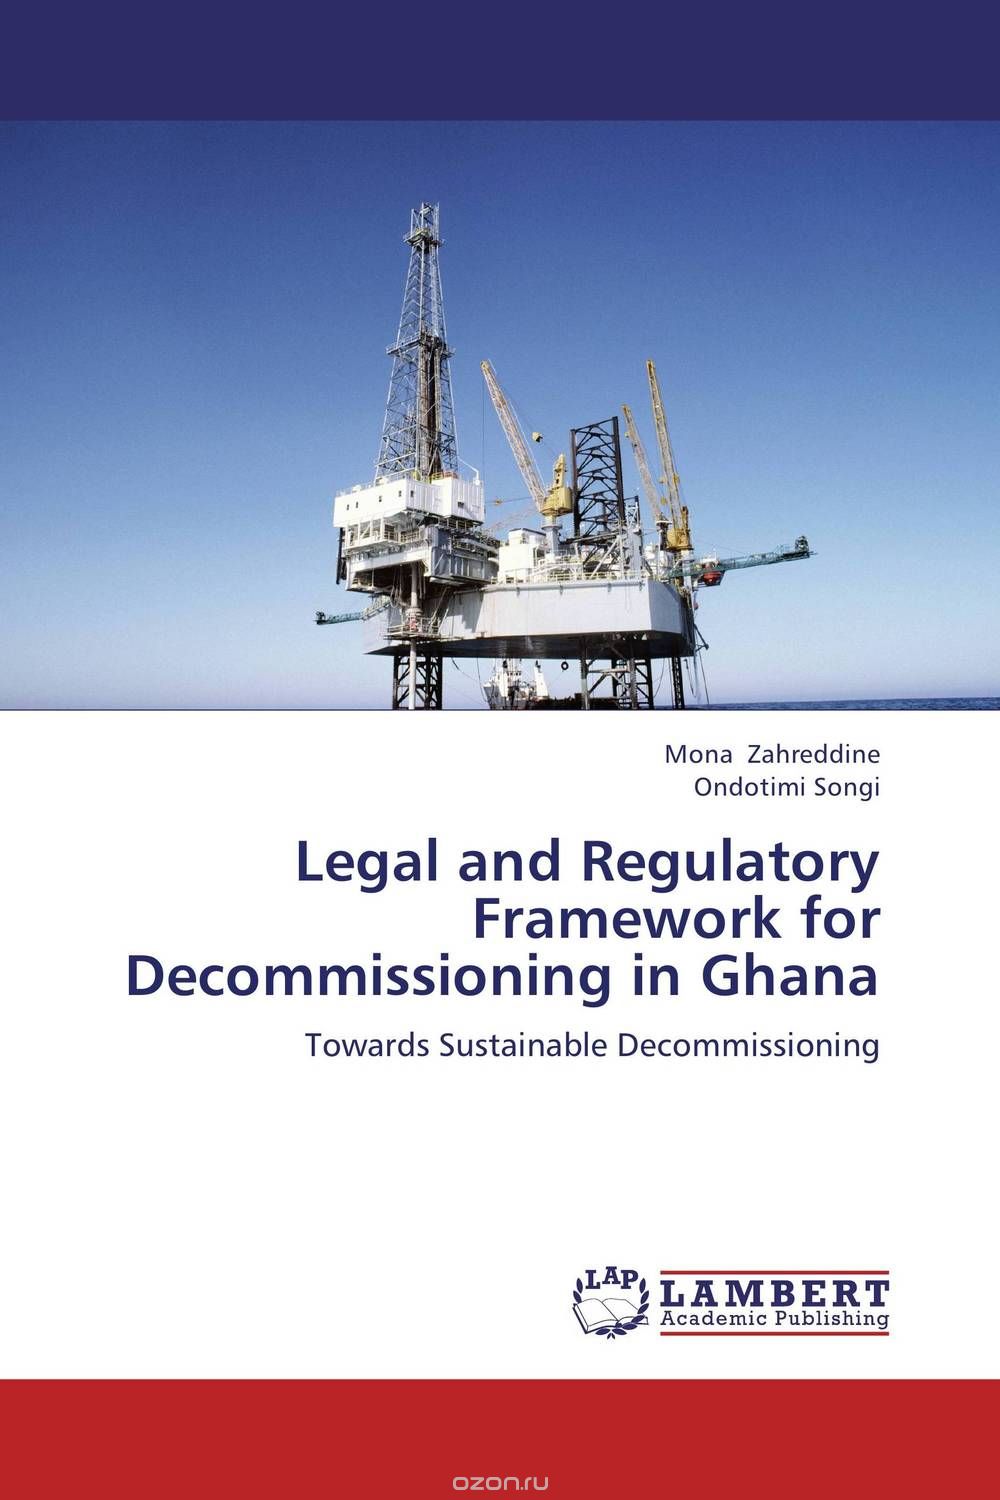 Legal and Regulatory Framework for Decommissioning in Ghana